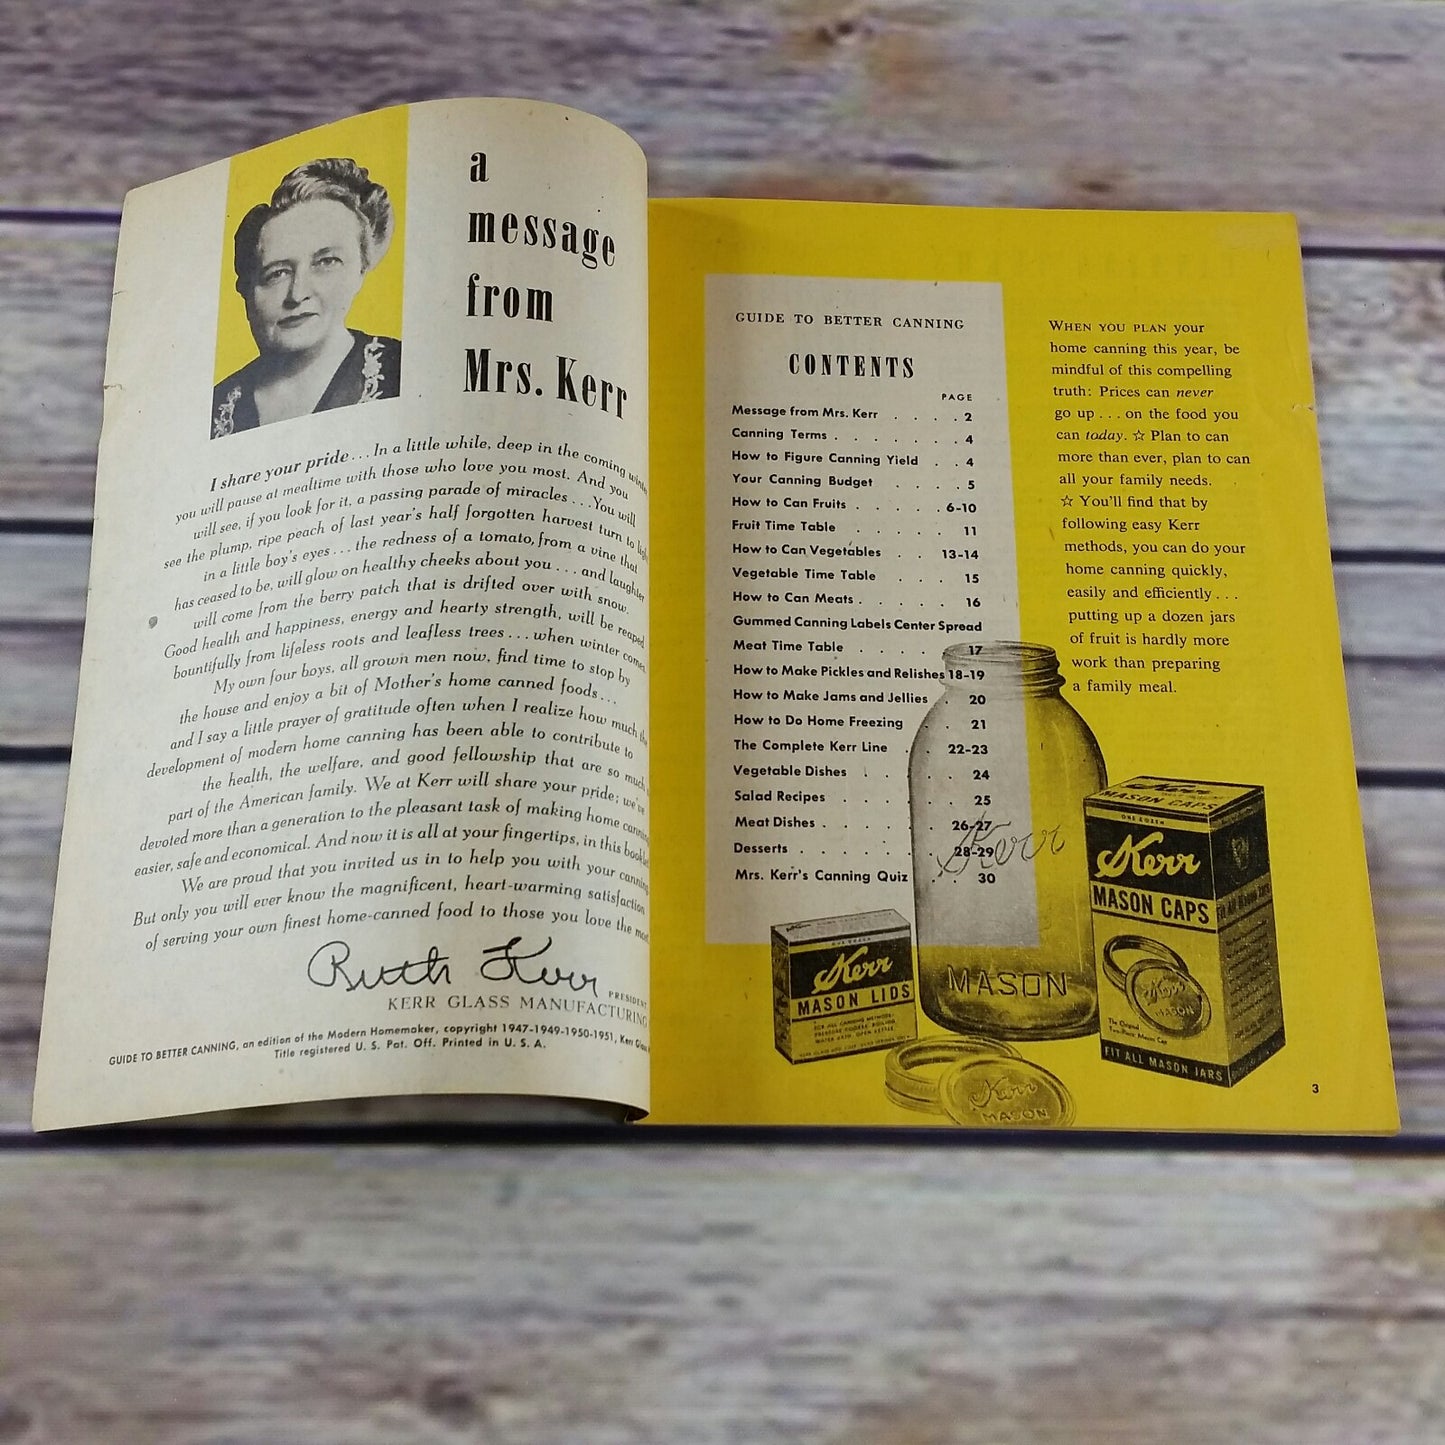 Vintage Kerr Home Canning Cookbook Guide to Better Canning Instructions Recipes 1951 Paperback Booklet - At Grandma's Table